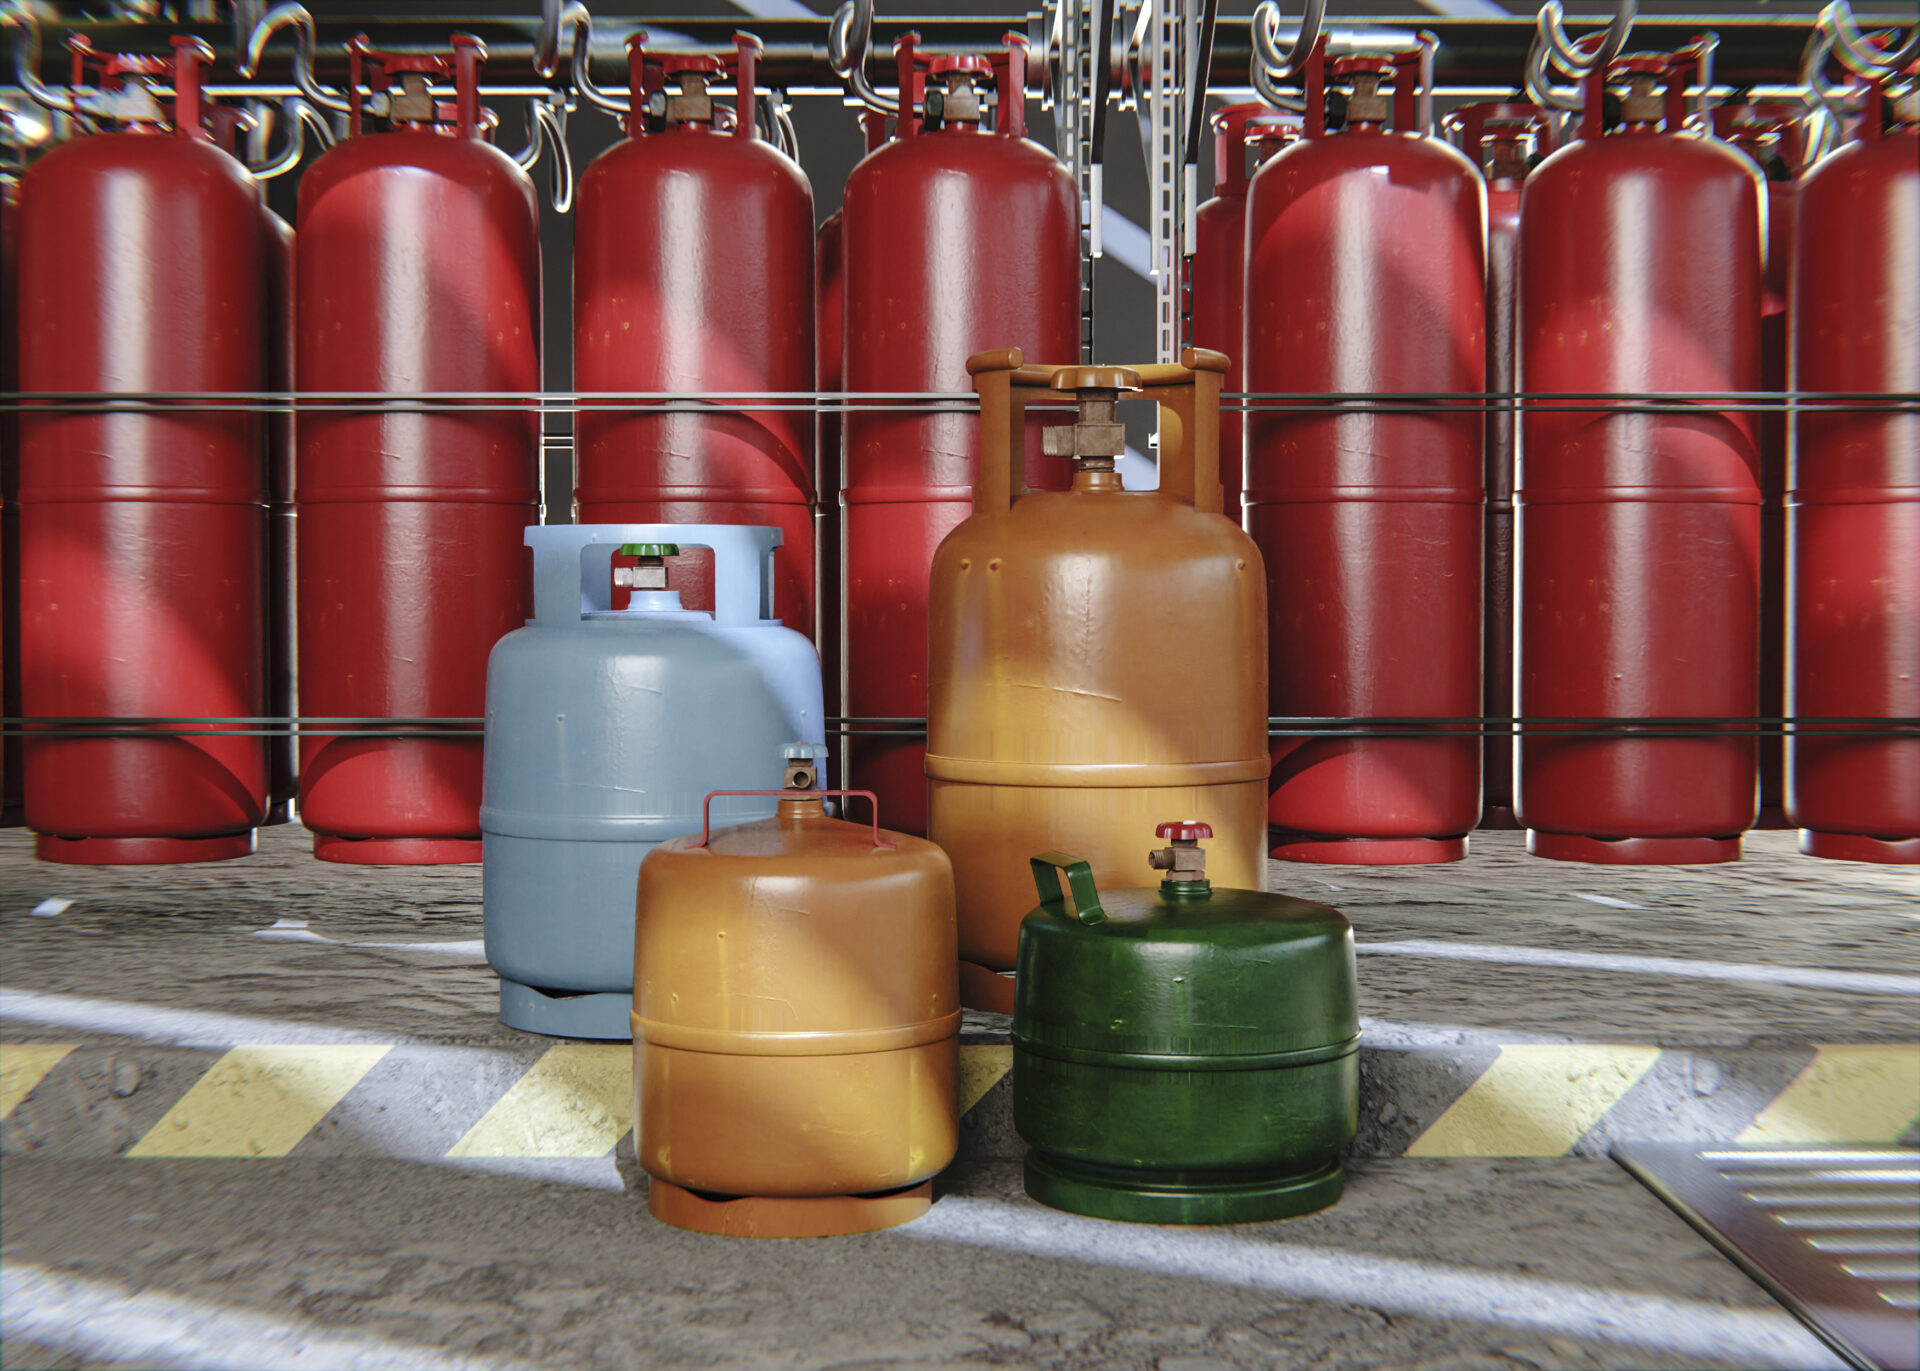 Gas cylinders stand ready to be picked up by a gas transportation truck.